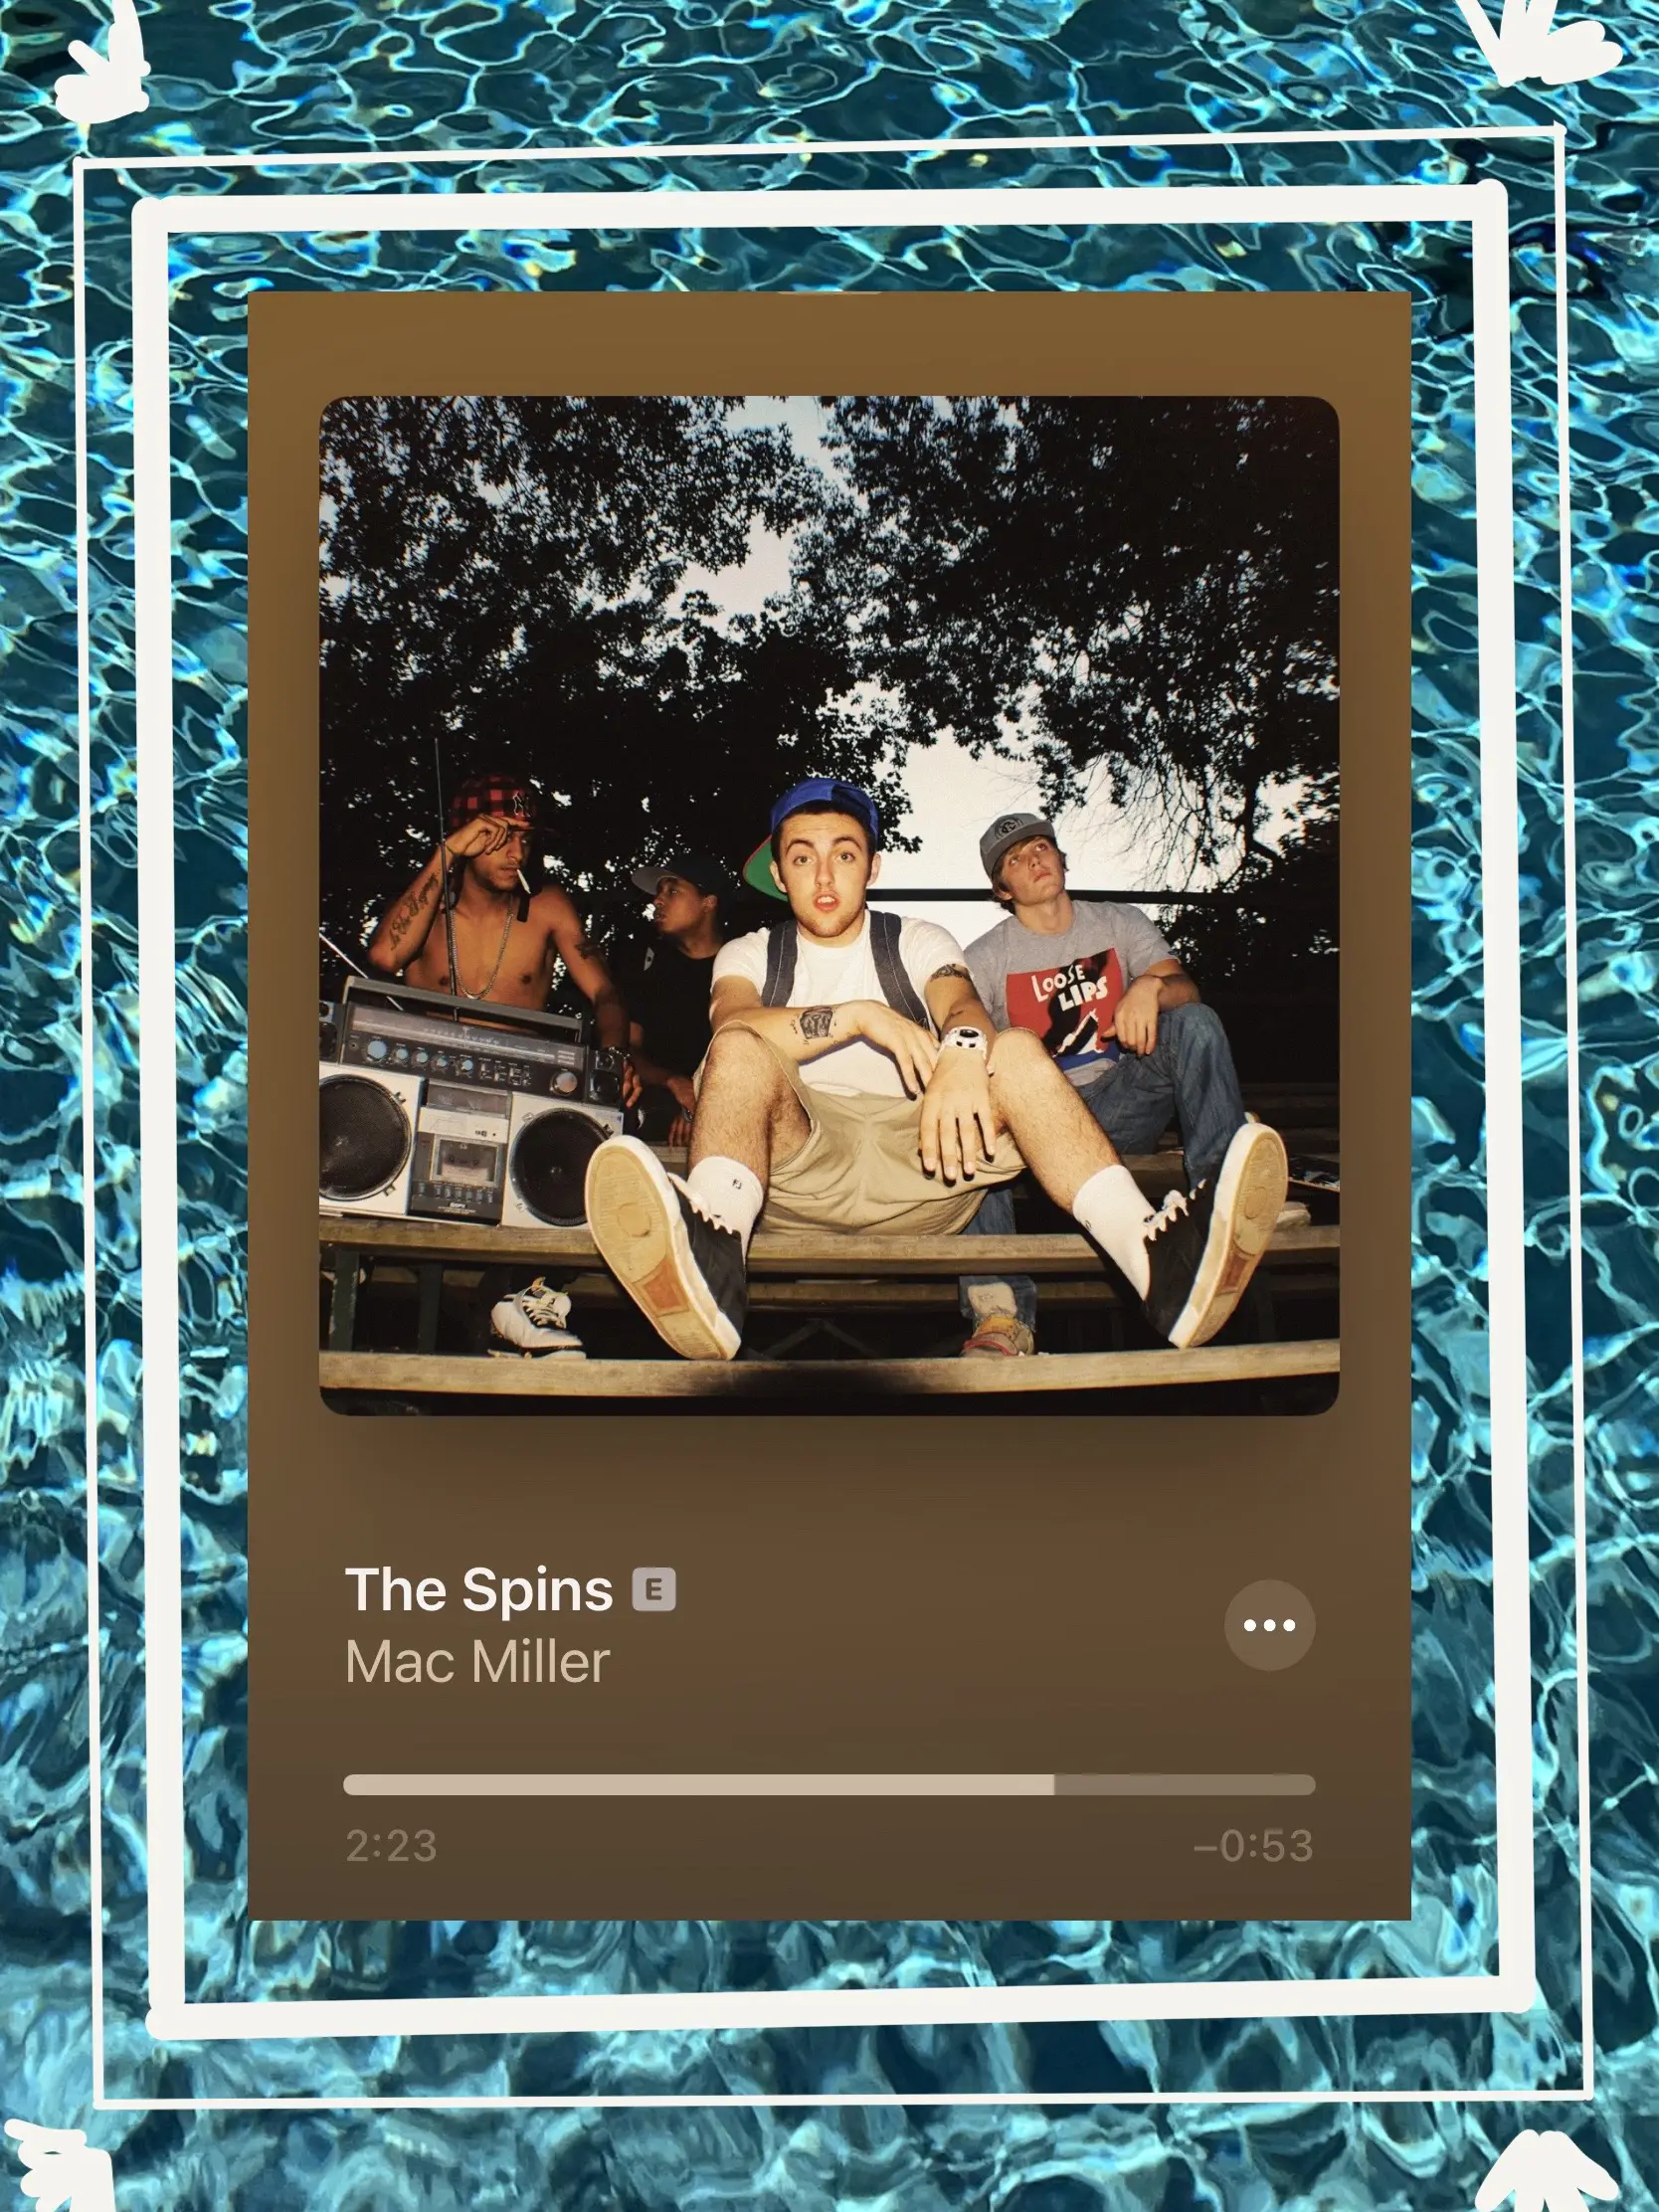  A picture of a group of people with the words "The Spins" on it.